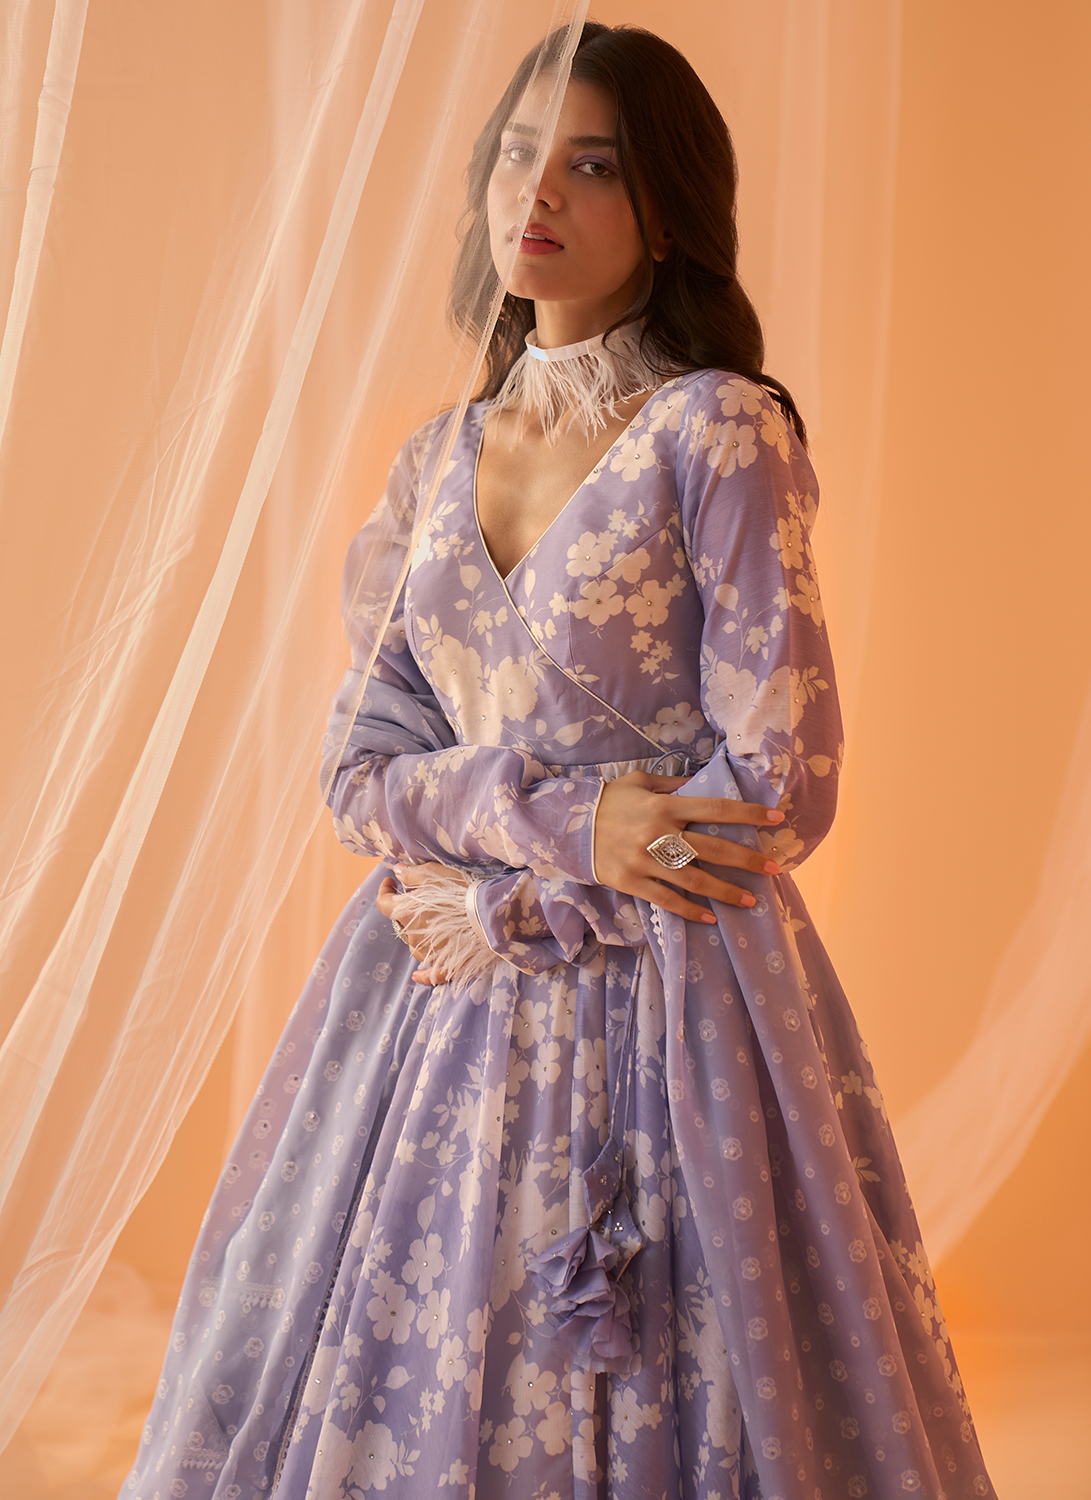 Dusty Periwinkle White Floral Printed Anarkali